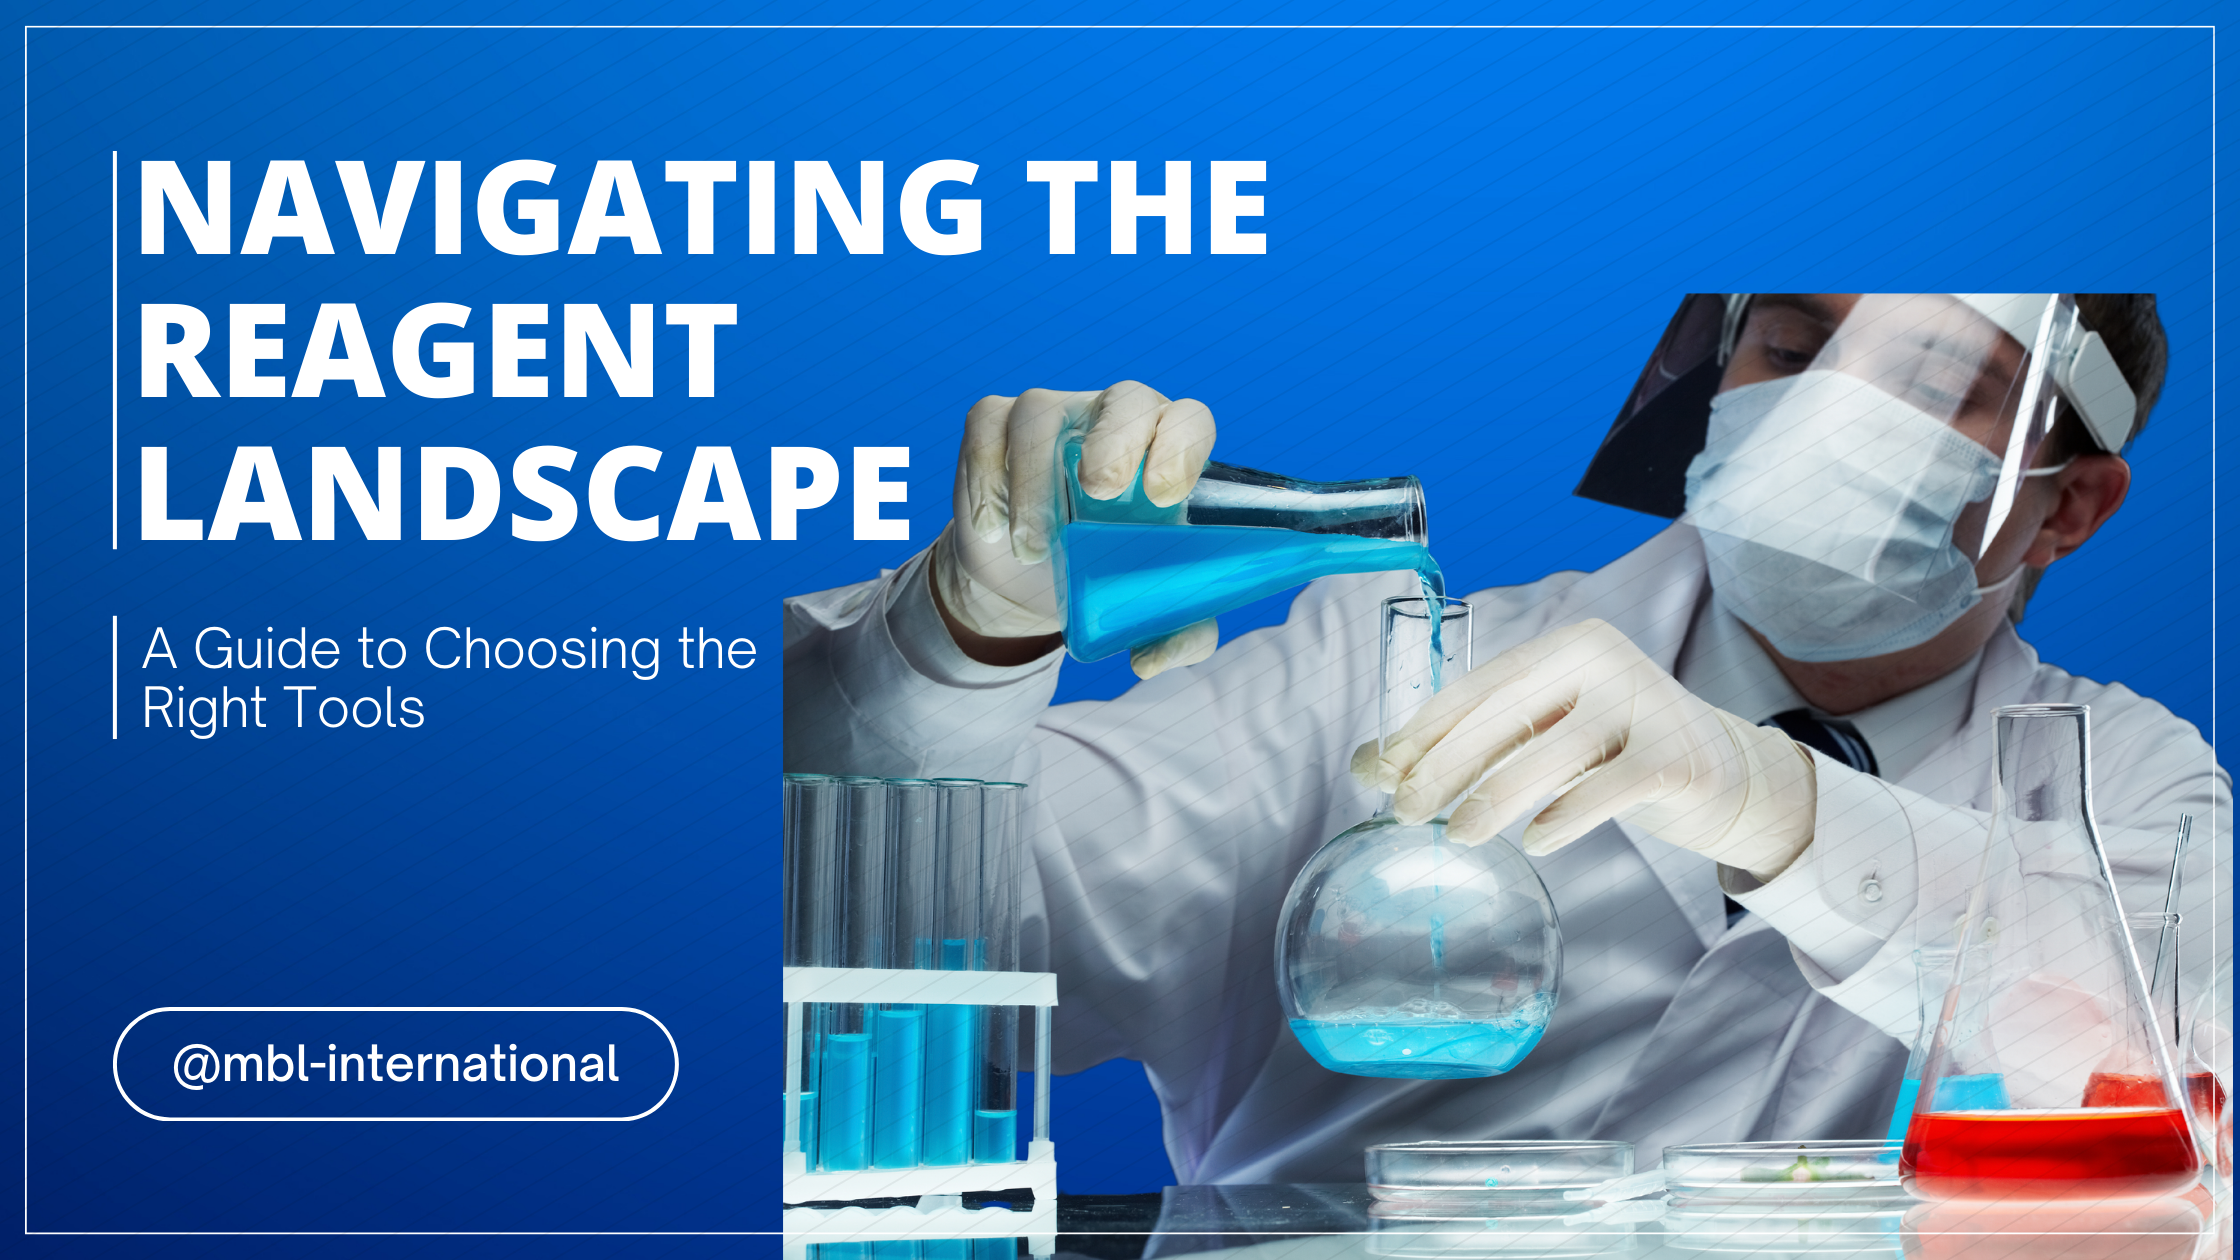 Navigating the Reagent Landscape: A Guide to Choosing the Right Tools